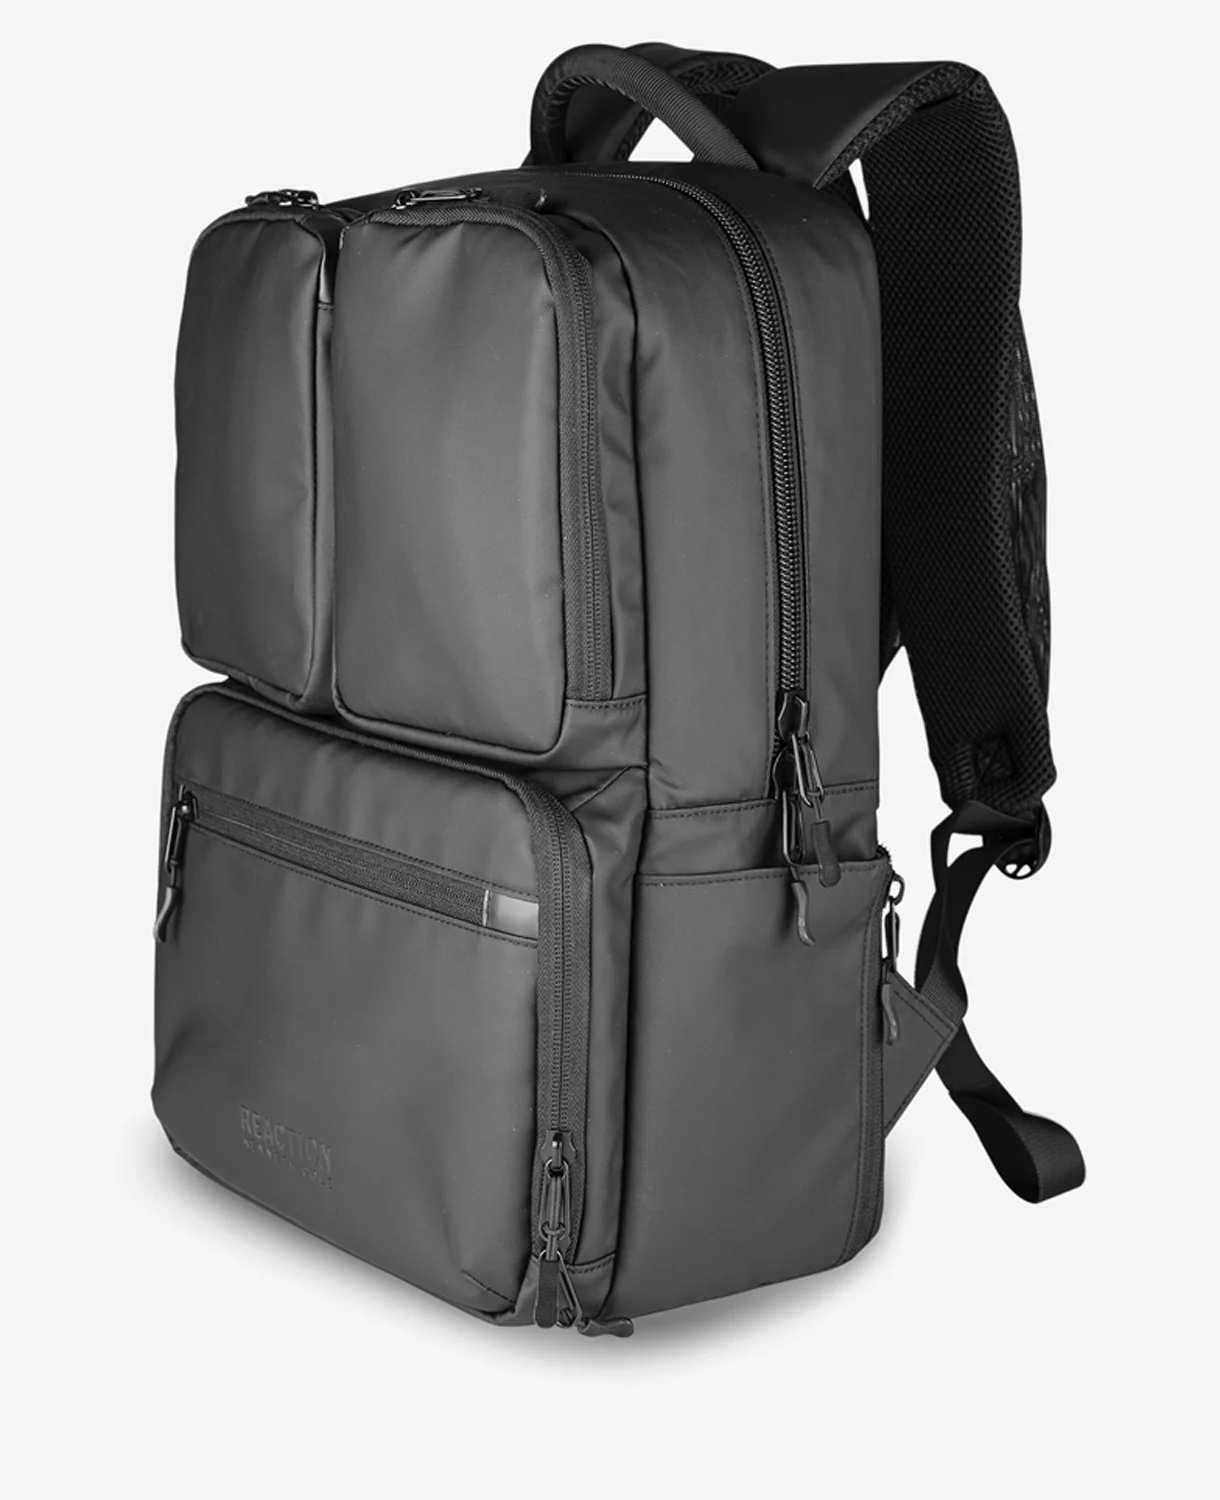 Ryder 17" Laptop Backpack with Removable Laptop Sleeve